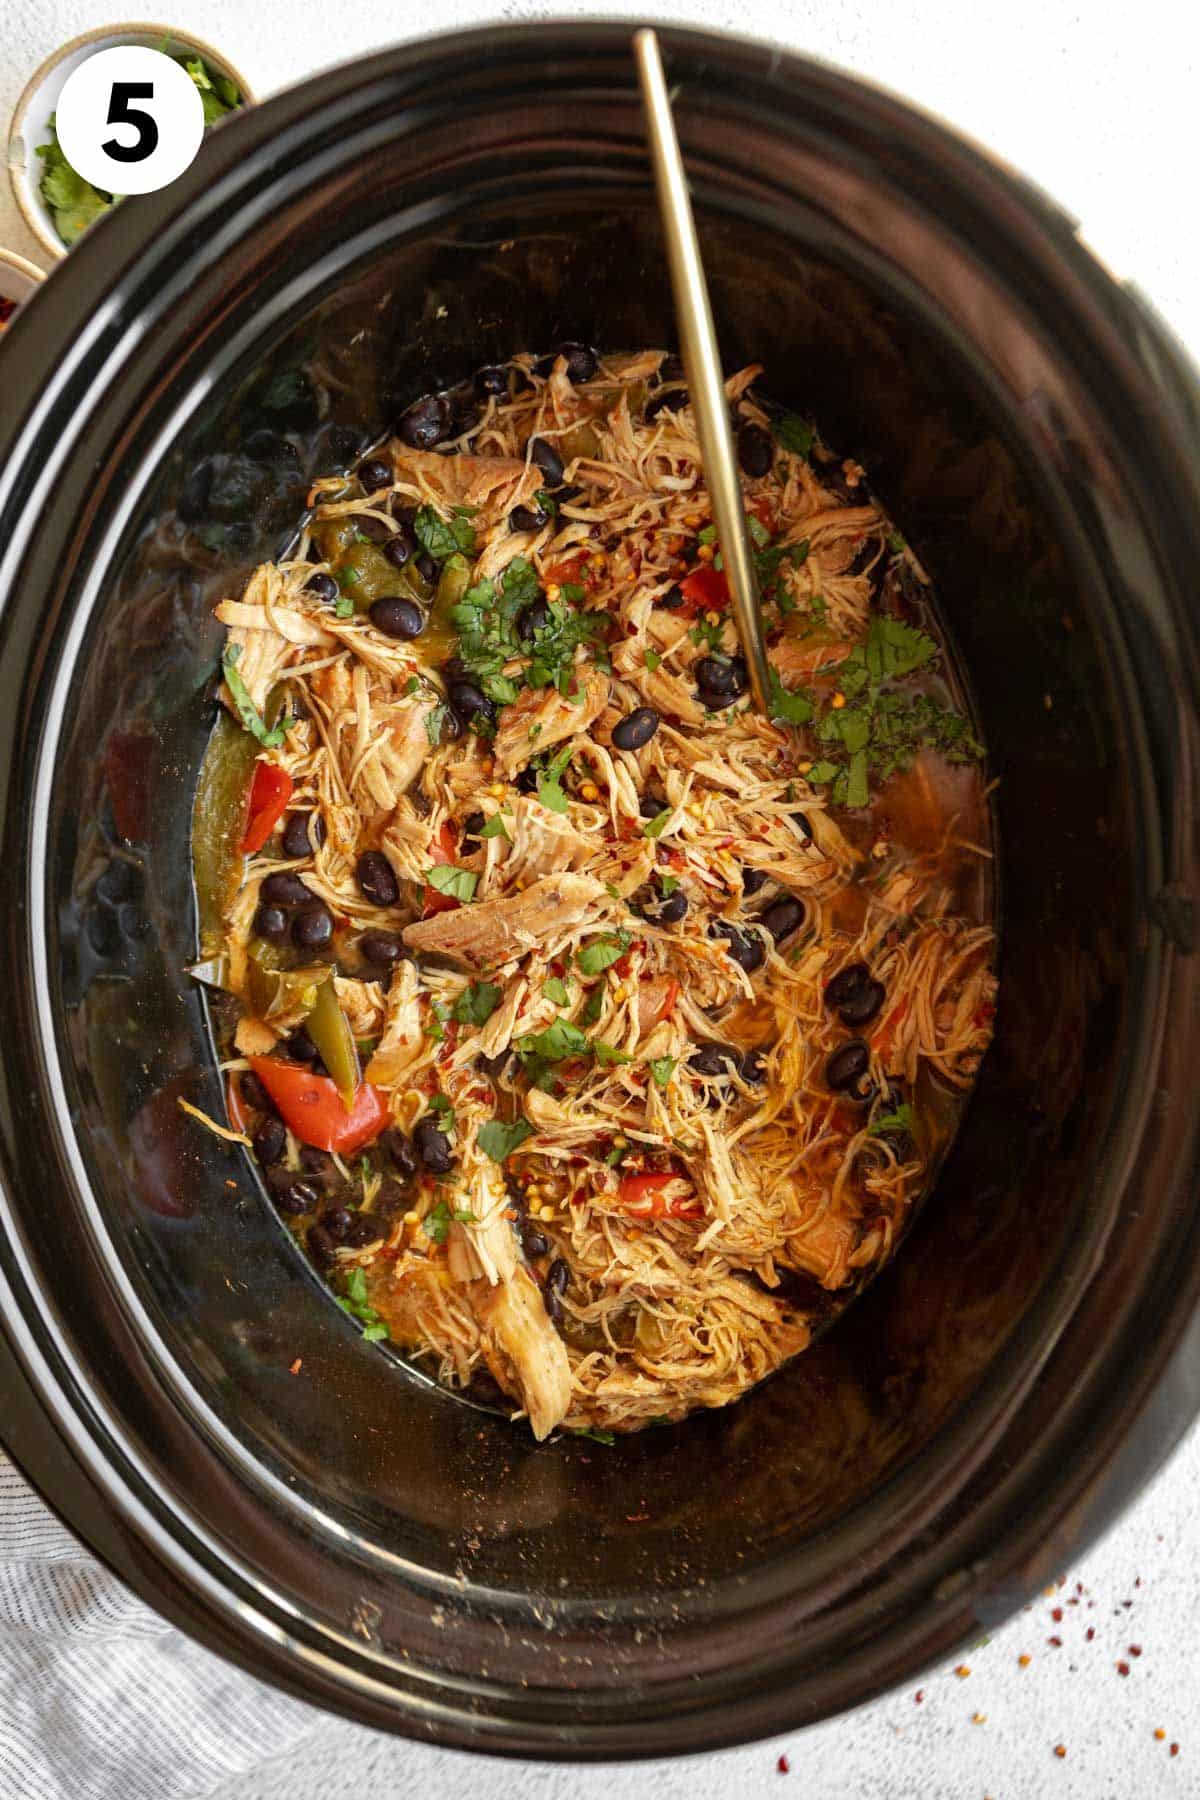 Slow cooker chicken taco bowl meat in a slow cooker after cooking and garnished with cilantro.